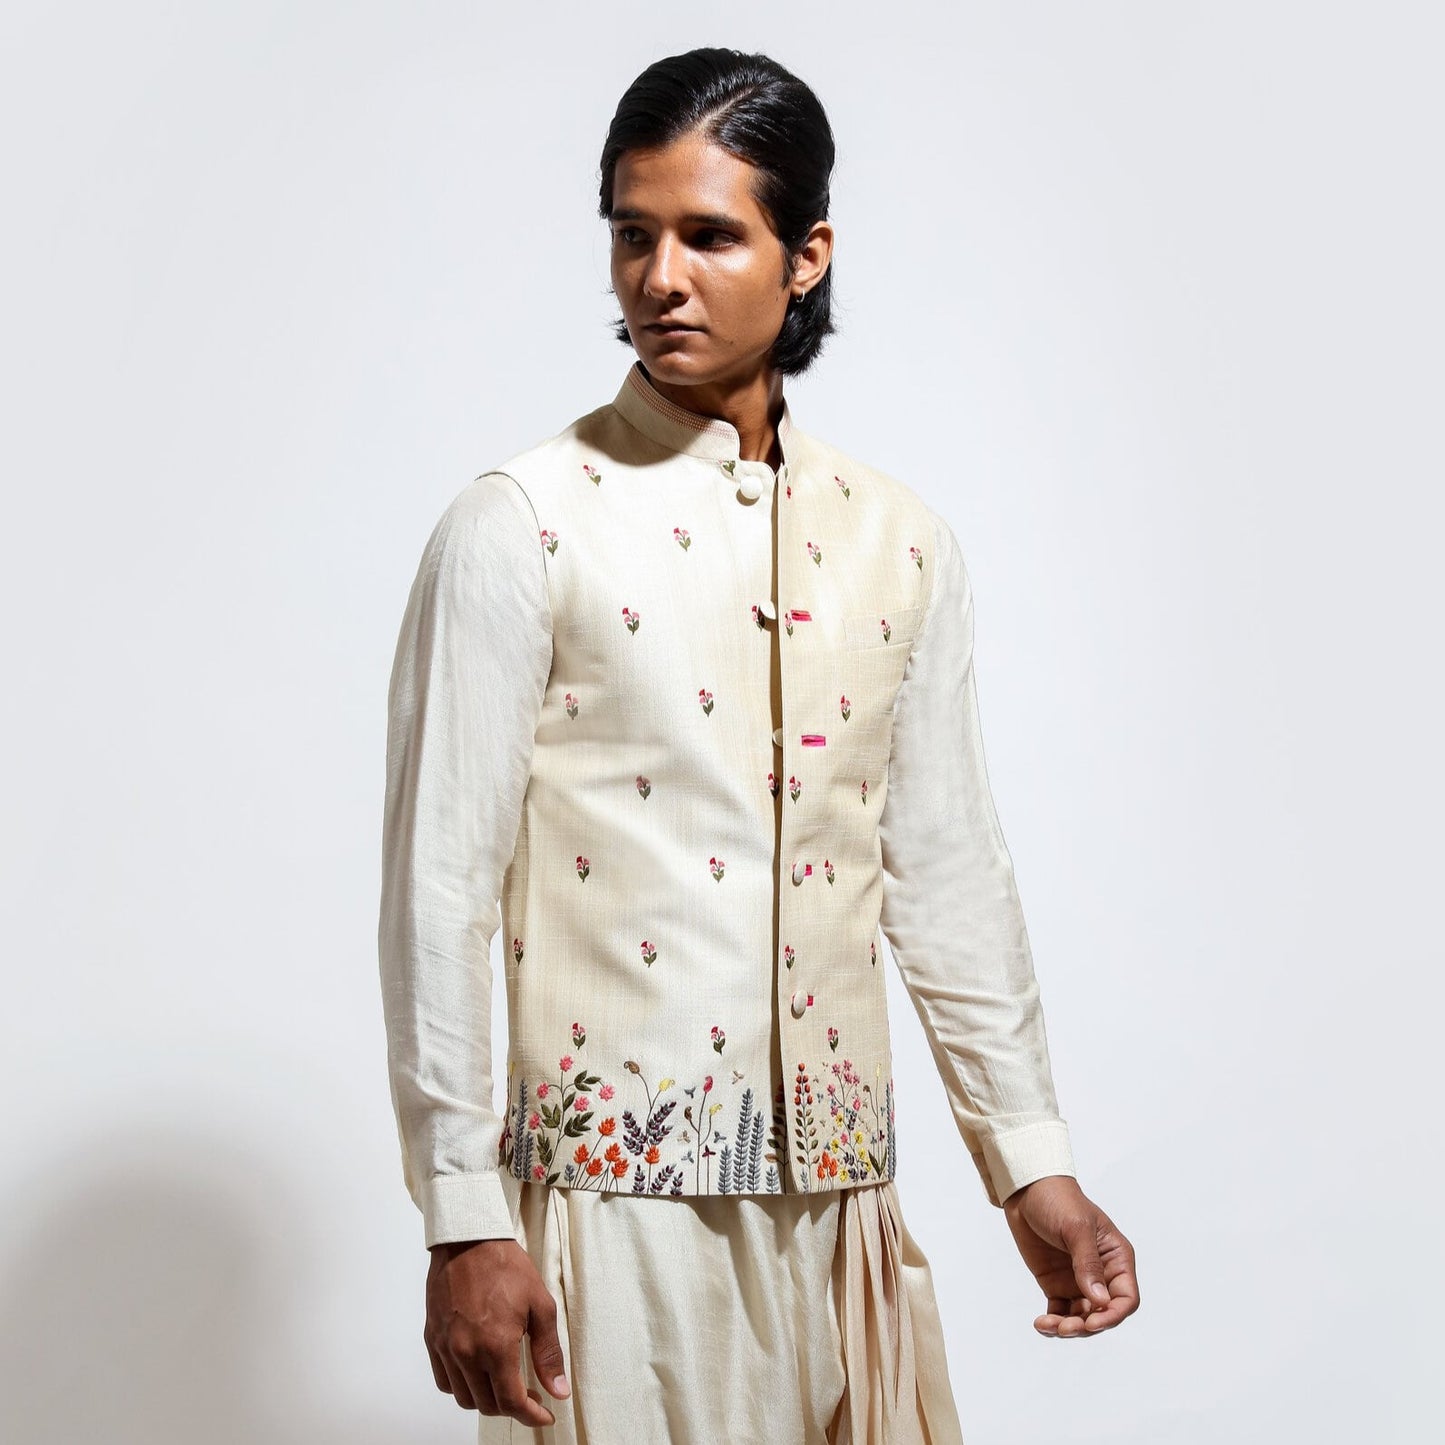 Sleeveless bandi with multicolor floral embroidery at hem